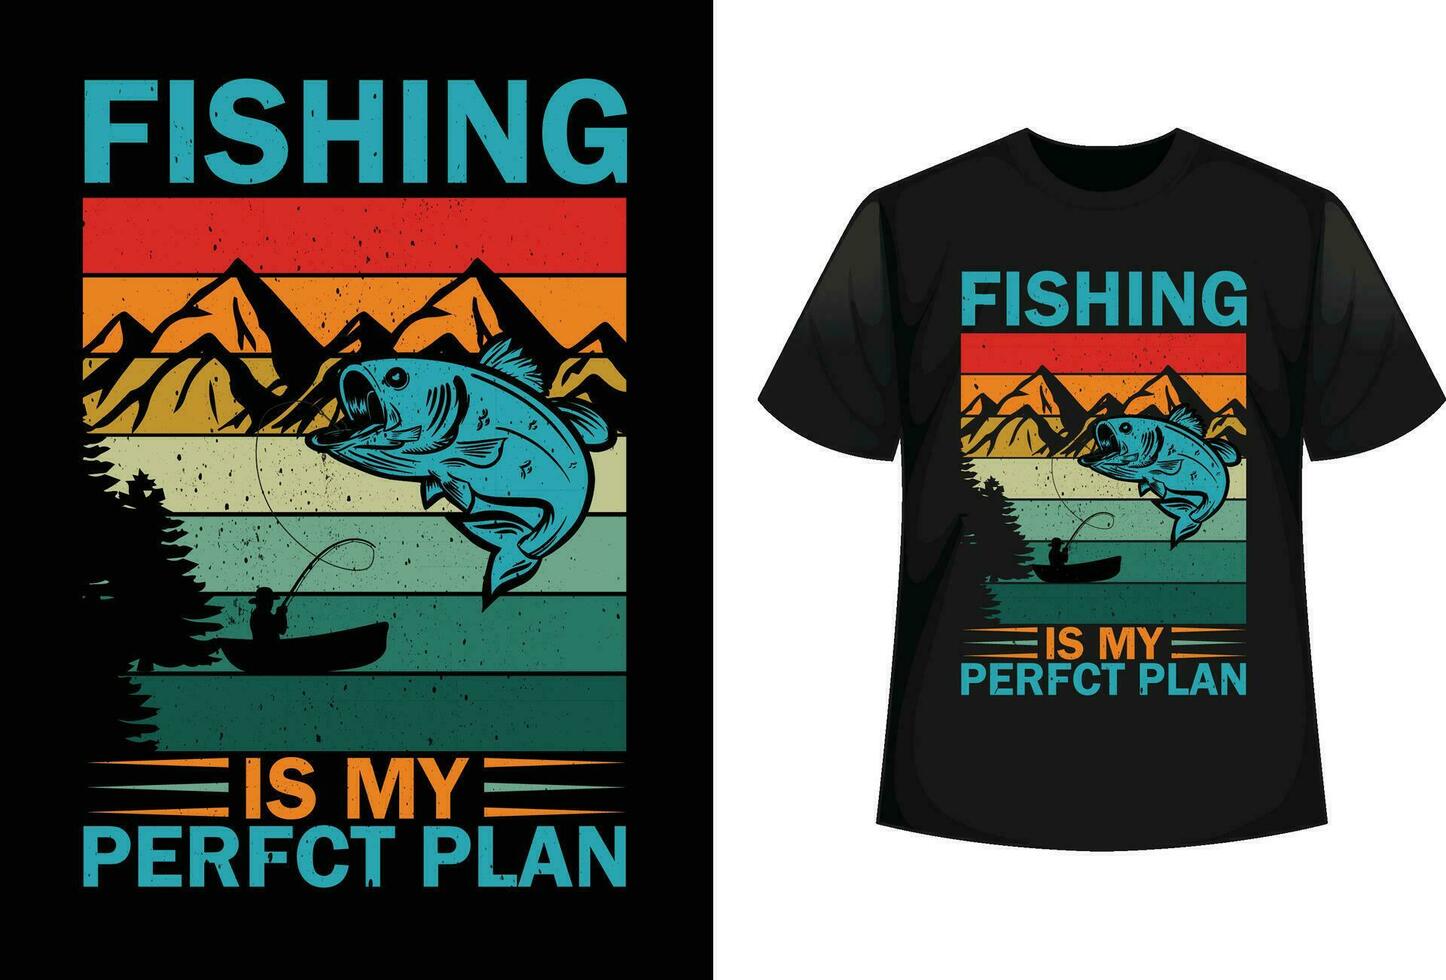 Fishing is my perfect plan, Fishing graphic typography T shirt designs vector